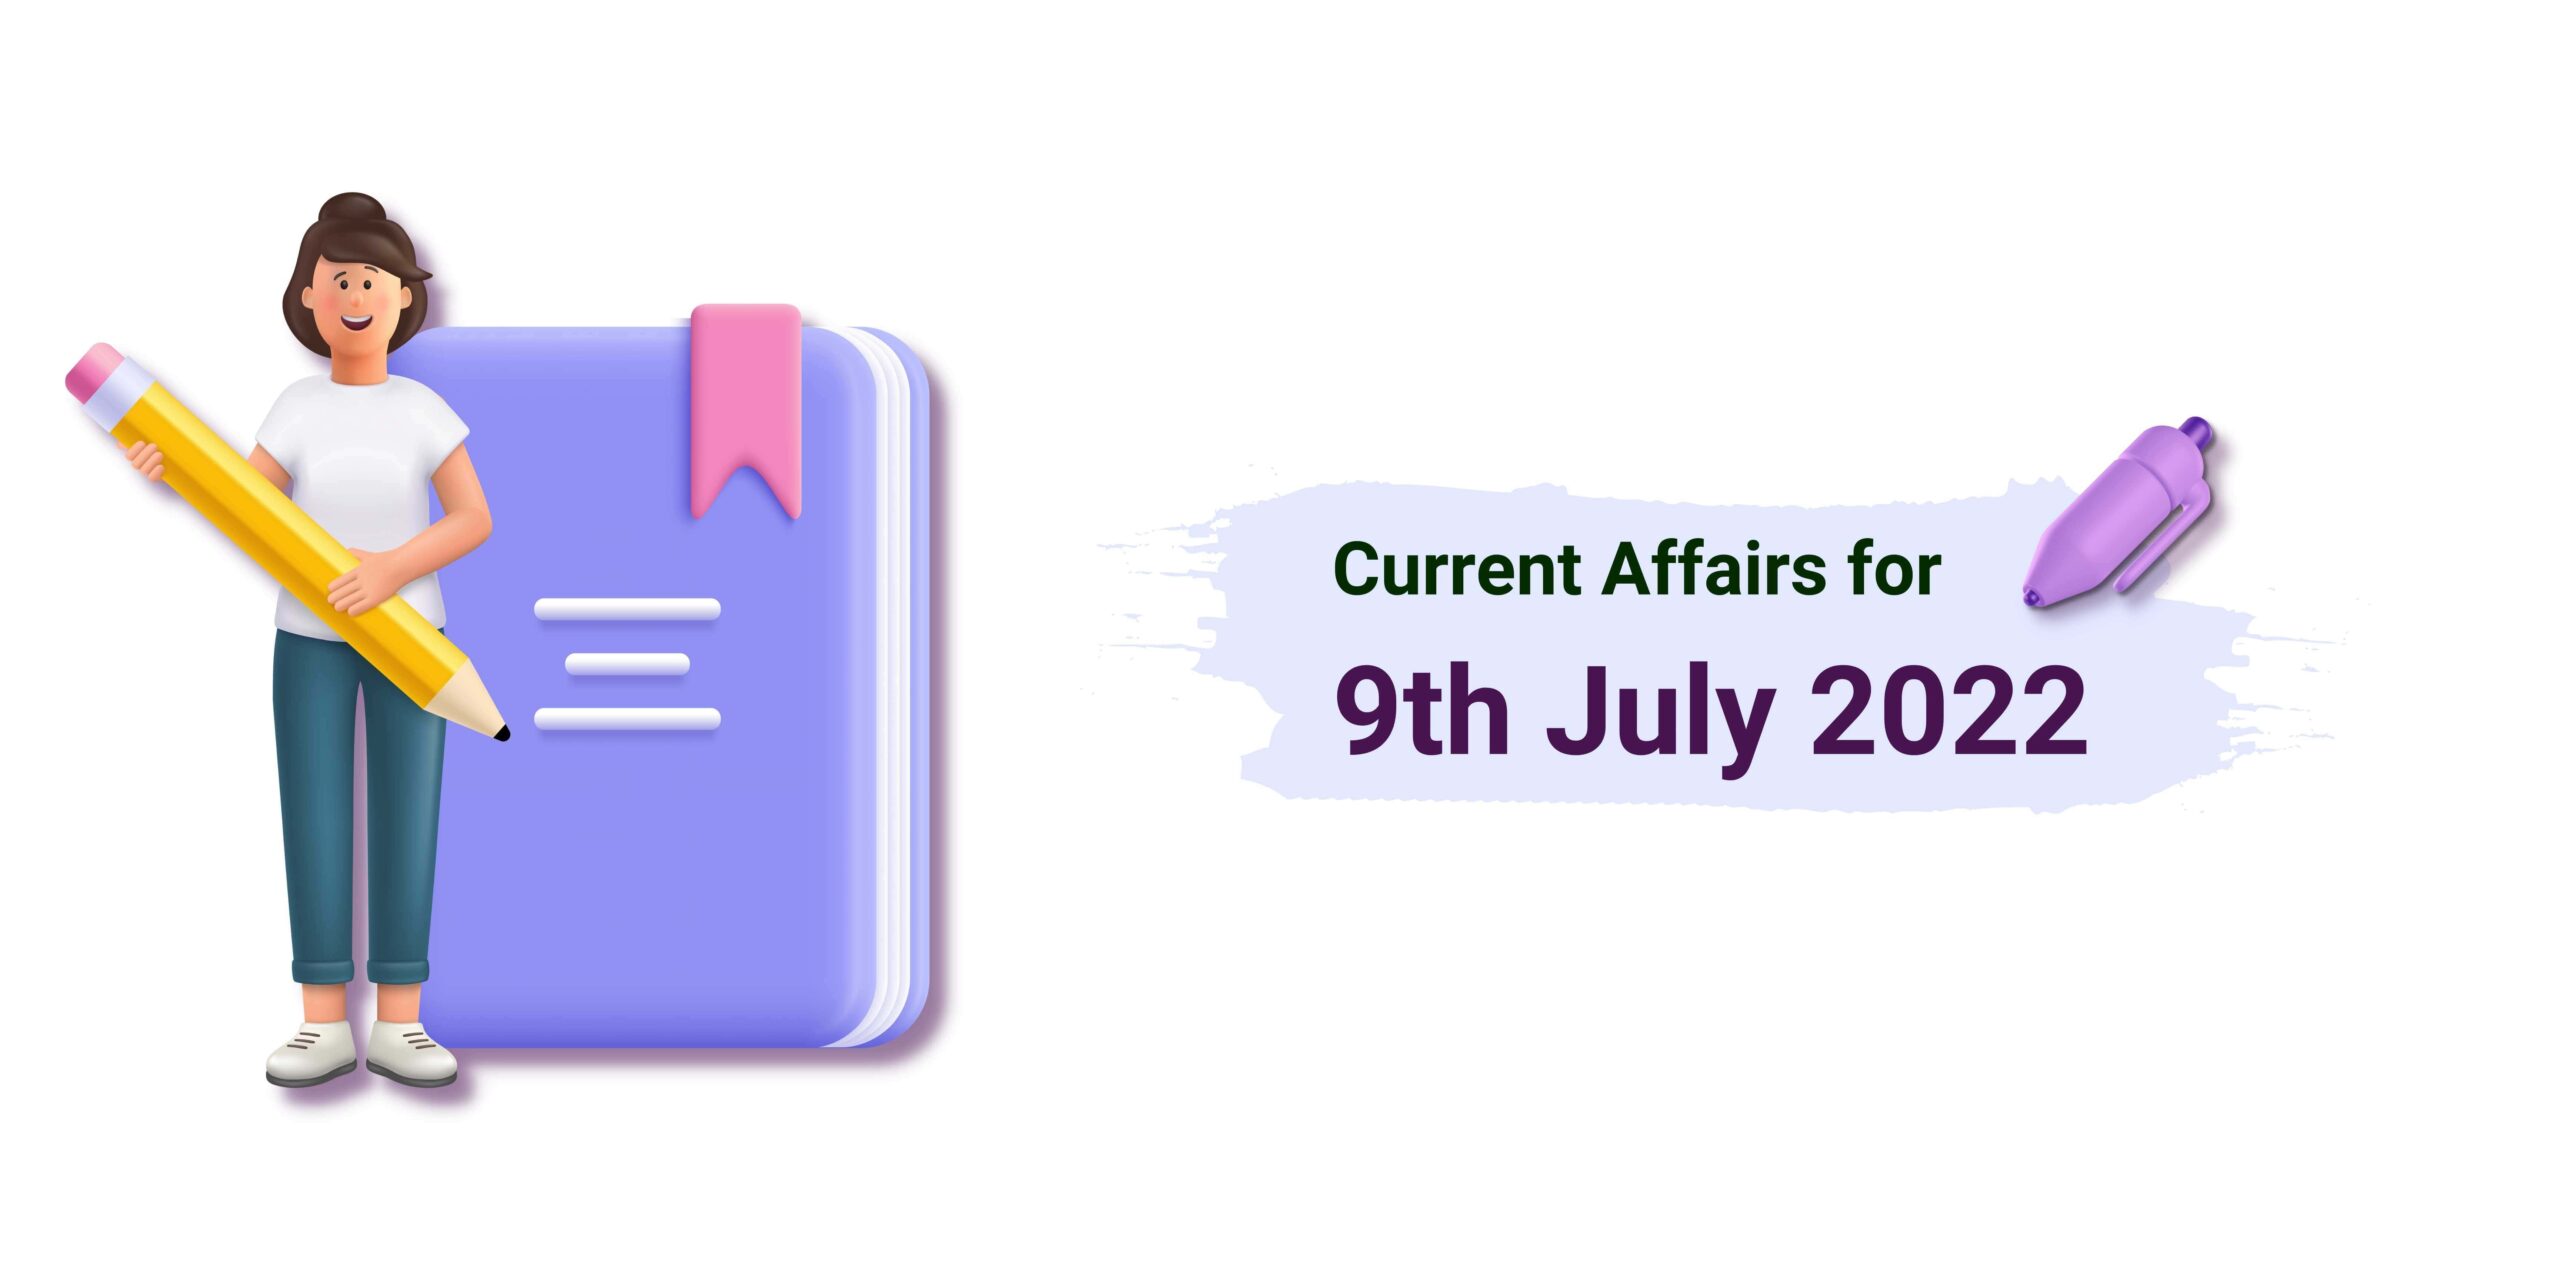 Current Affairs 9th July 2022